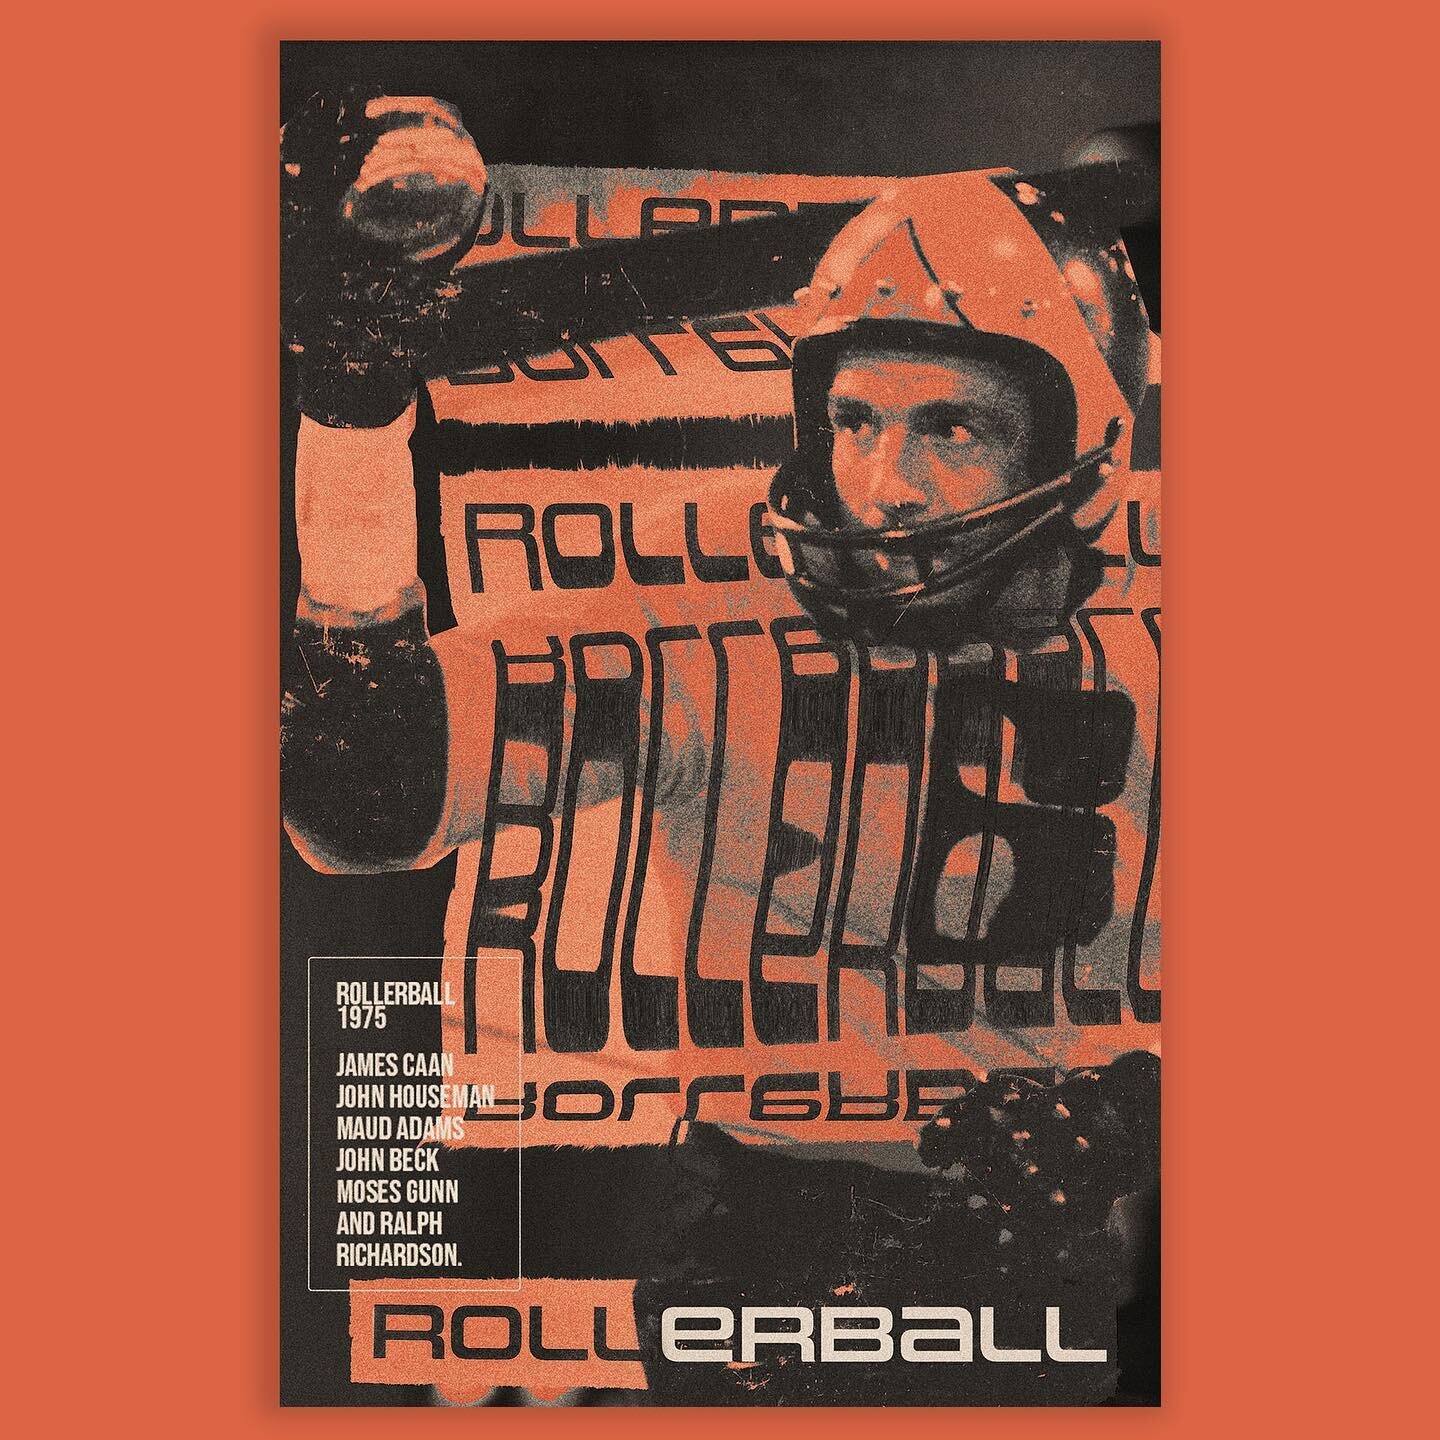 Rollerball 1975 - Typographic Poster.

I introduce to you...the rollerball god...Jonathan E.